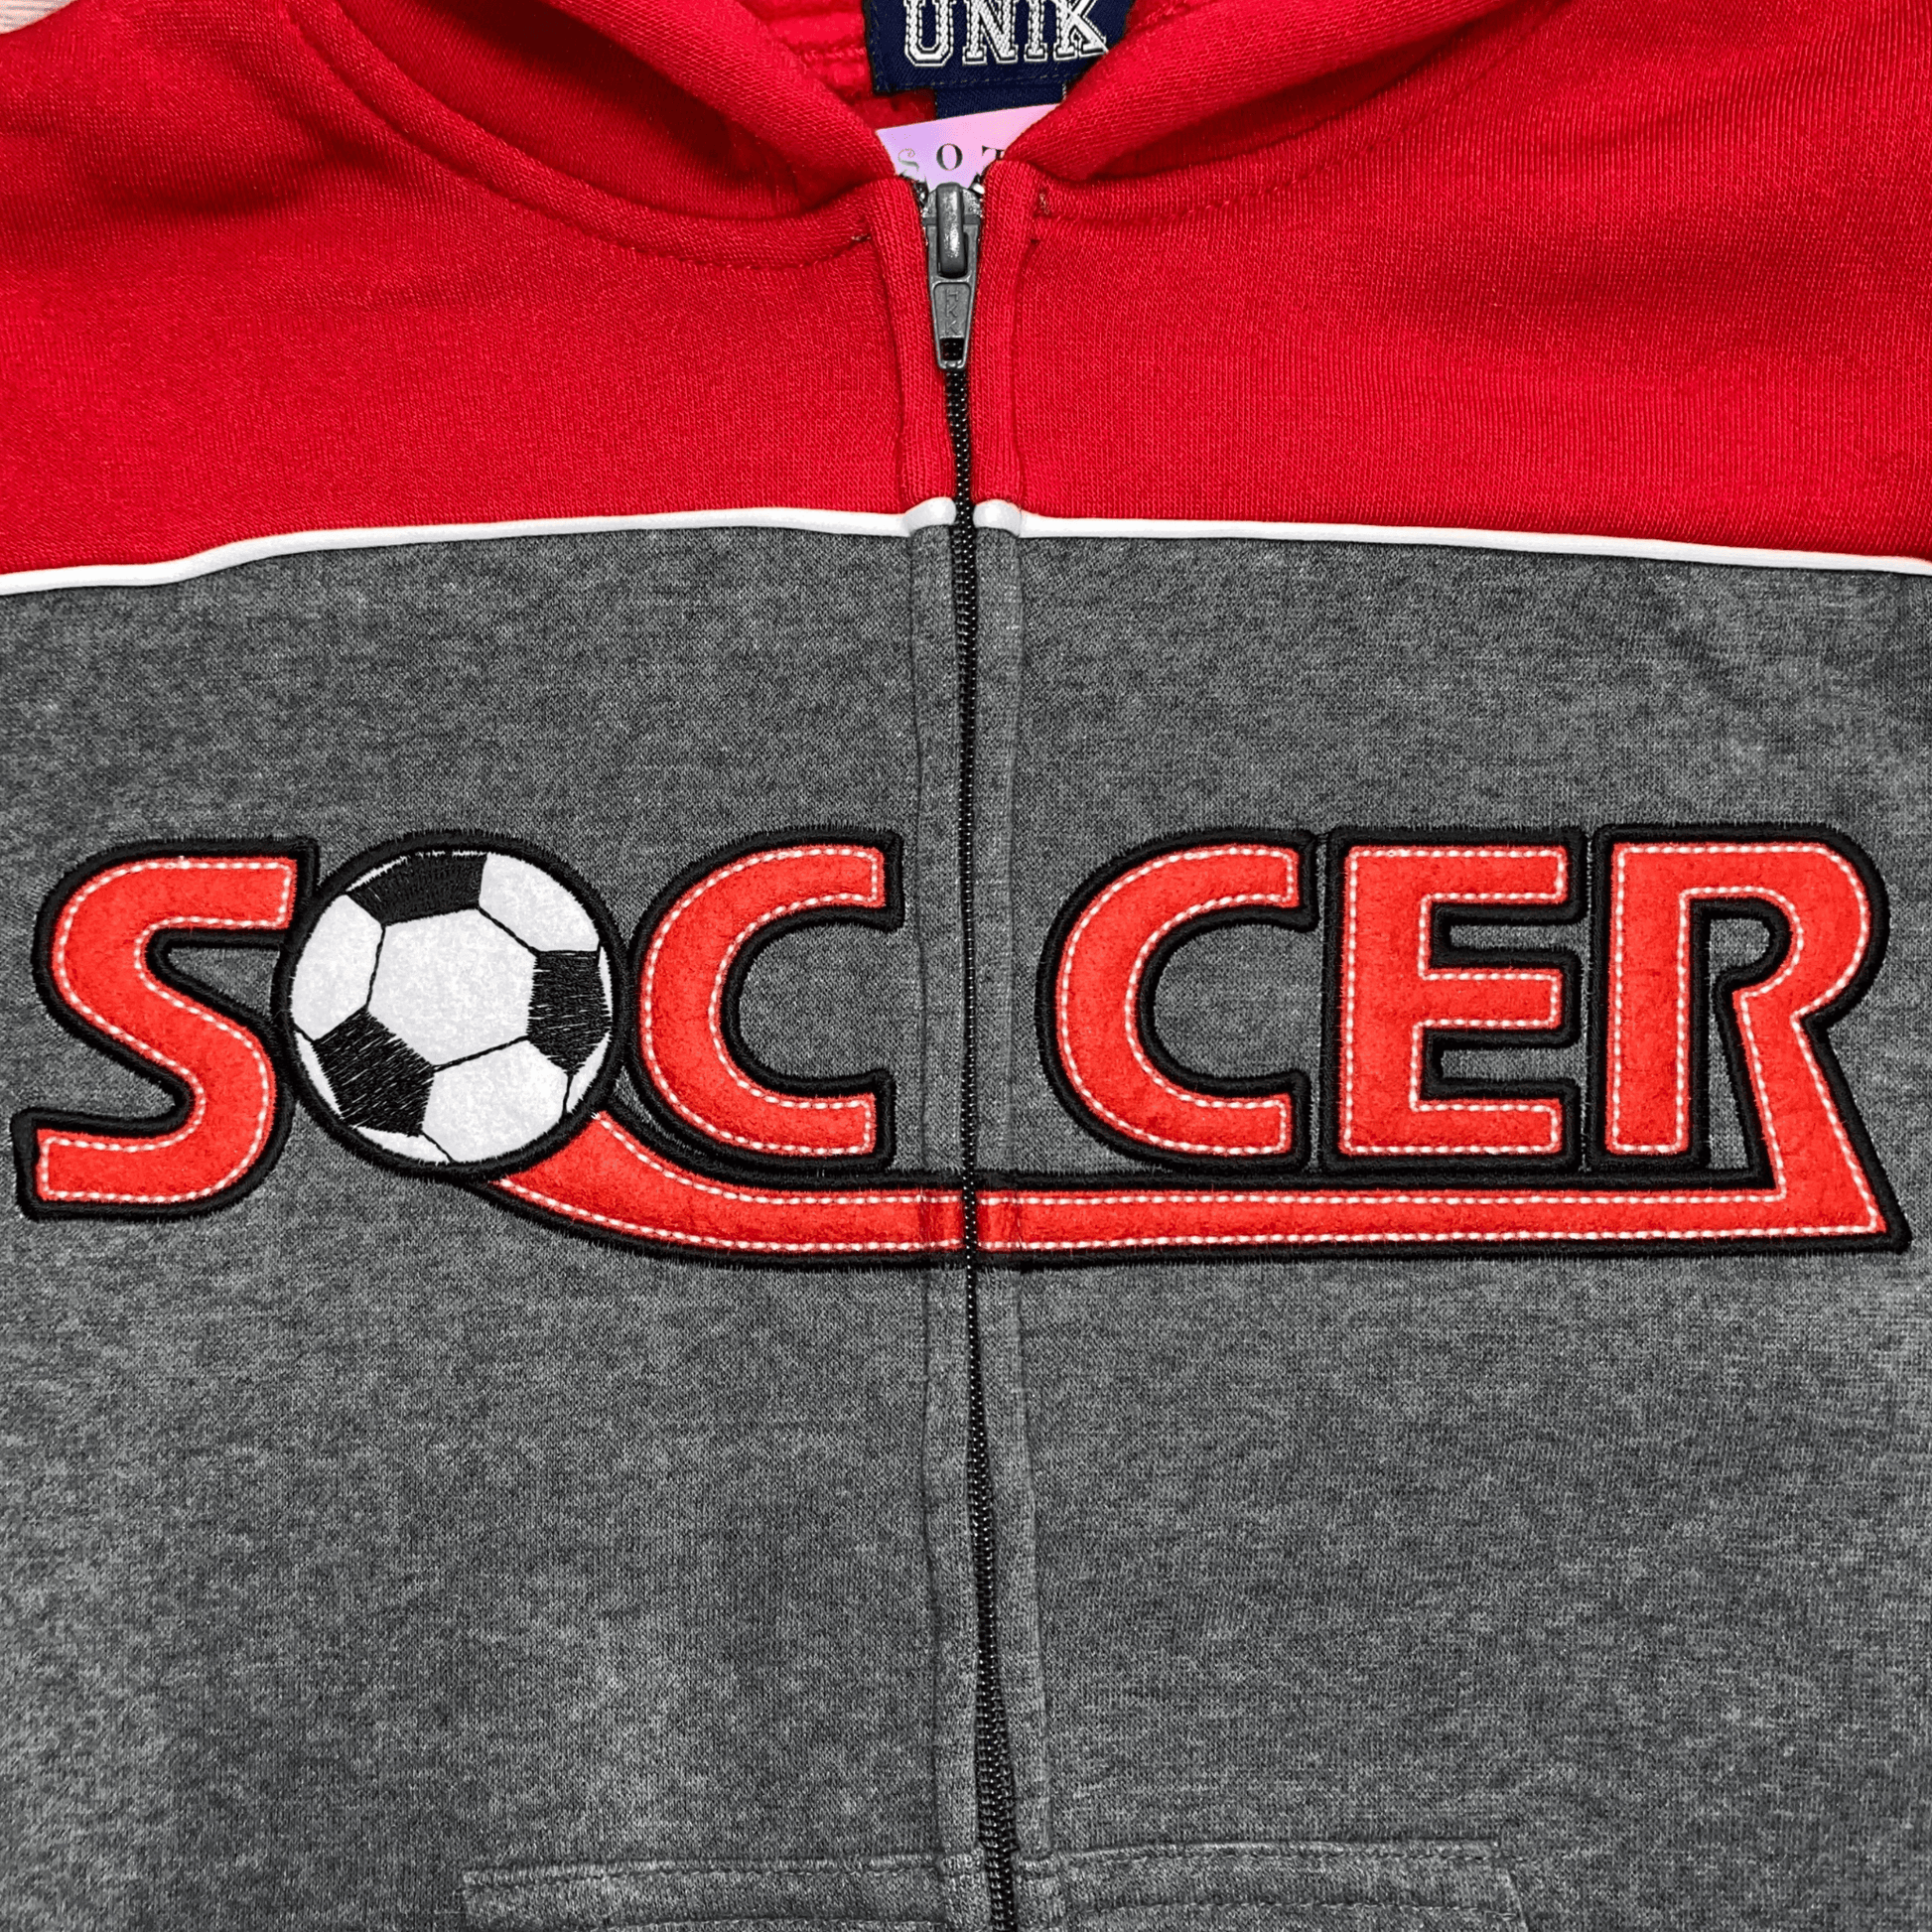 This dark grey soccer fleece set with red trim is perfect for your little soccer fan.  This sweat suit features the soccer logo written with a soccer ball for the letter "o" and thick red stripes down the side of the legs.